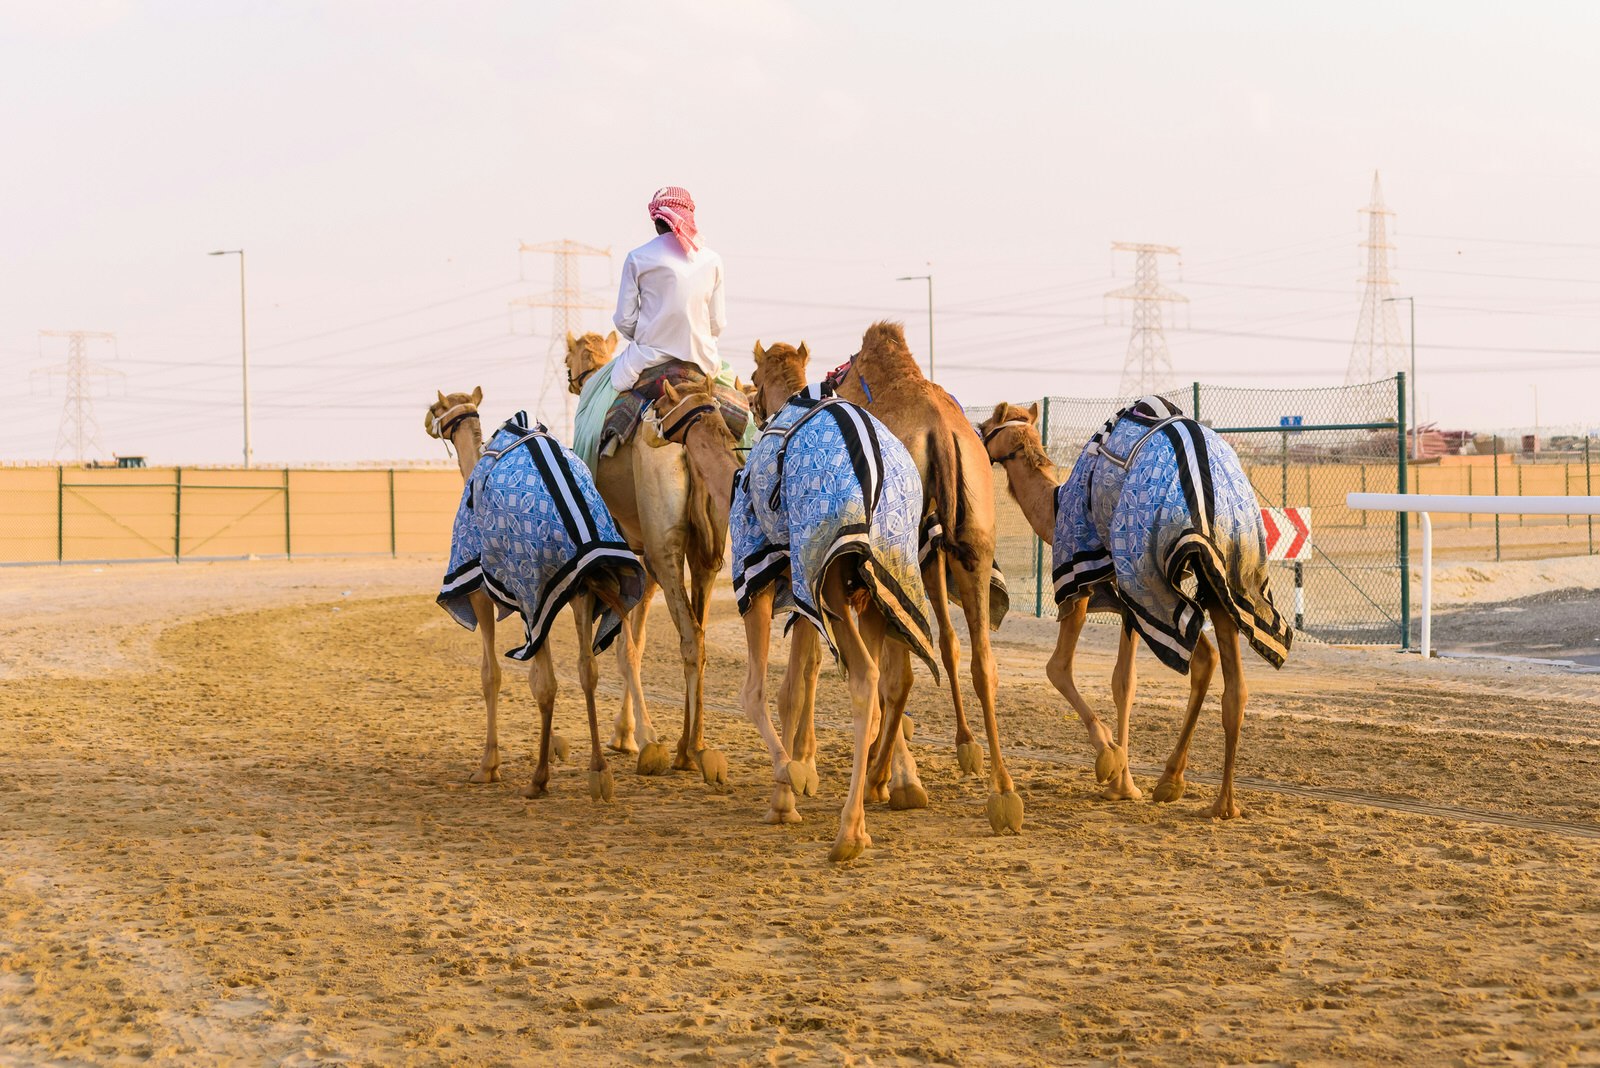 Camel rider going home with his flock of camels after a race in Al Wathba near Abu Dhabi, United Arab Emirates